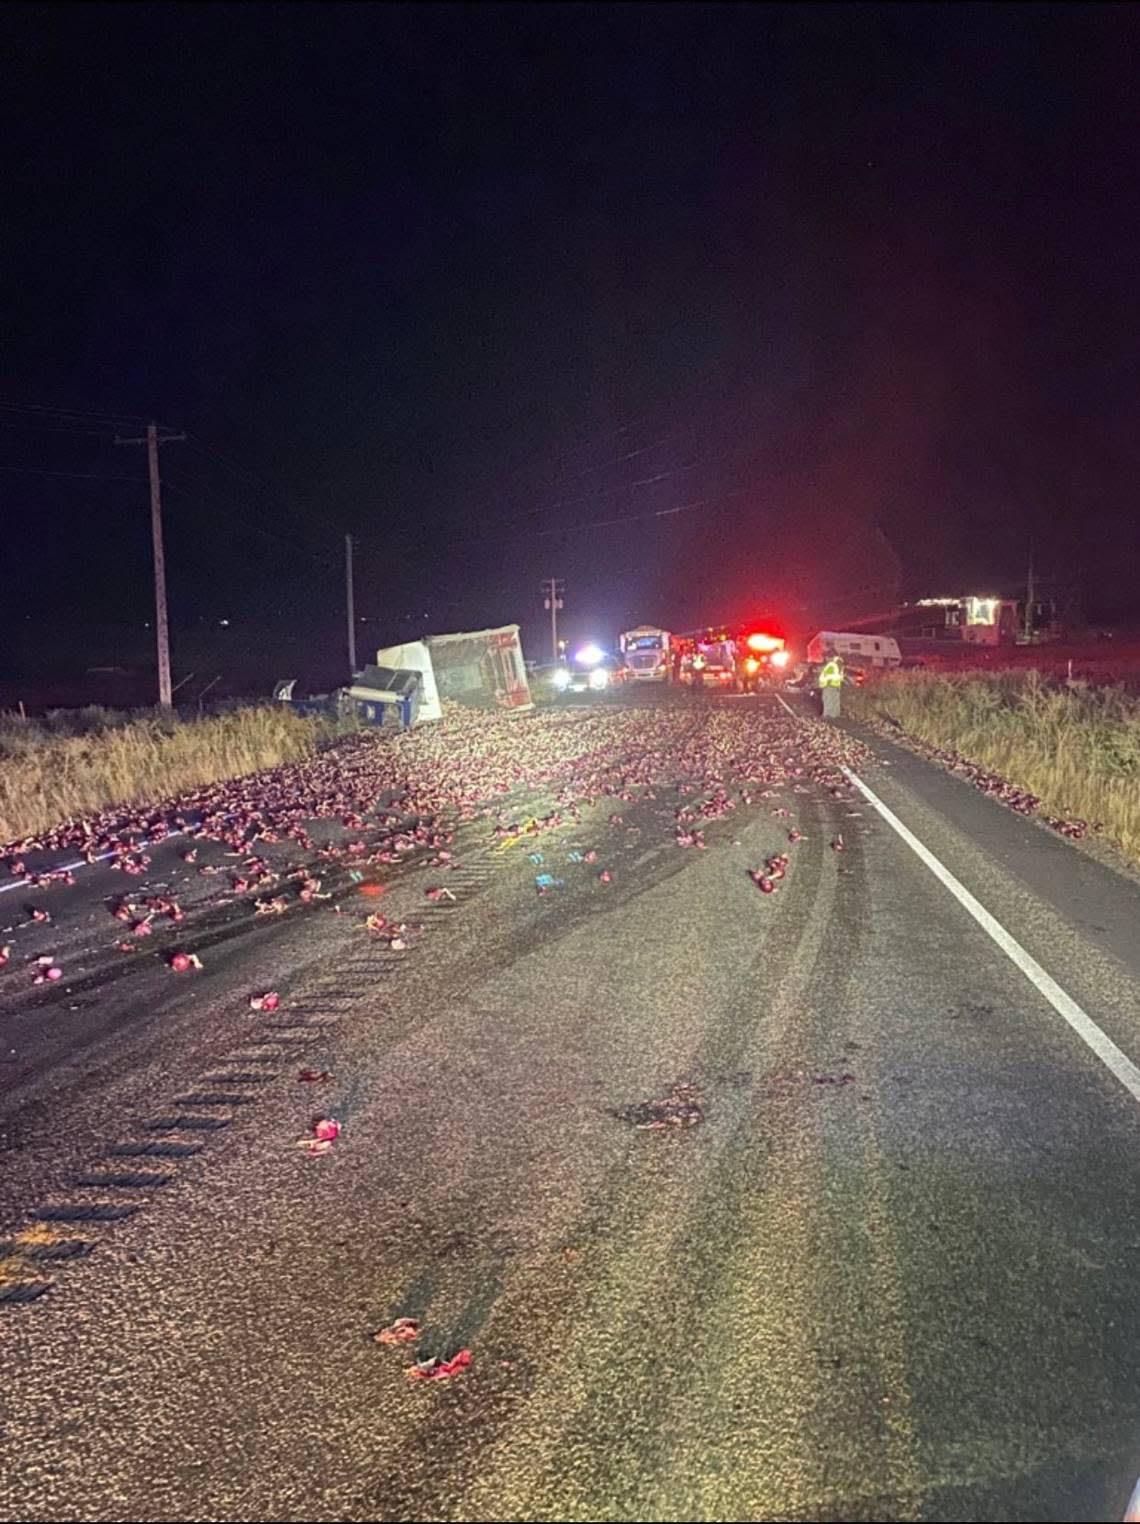 A semi truck and trailer dumped a load of onions across Highway 221 after it was hit by an oncoming car late Tuesday.